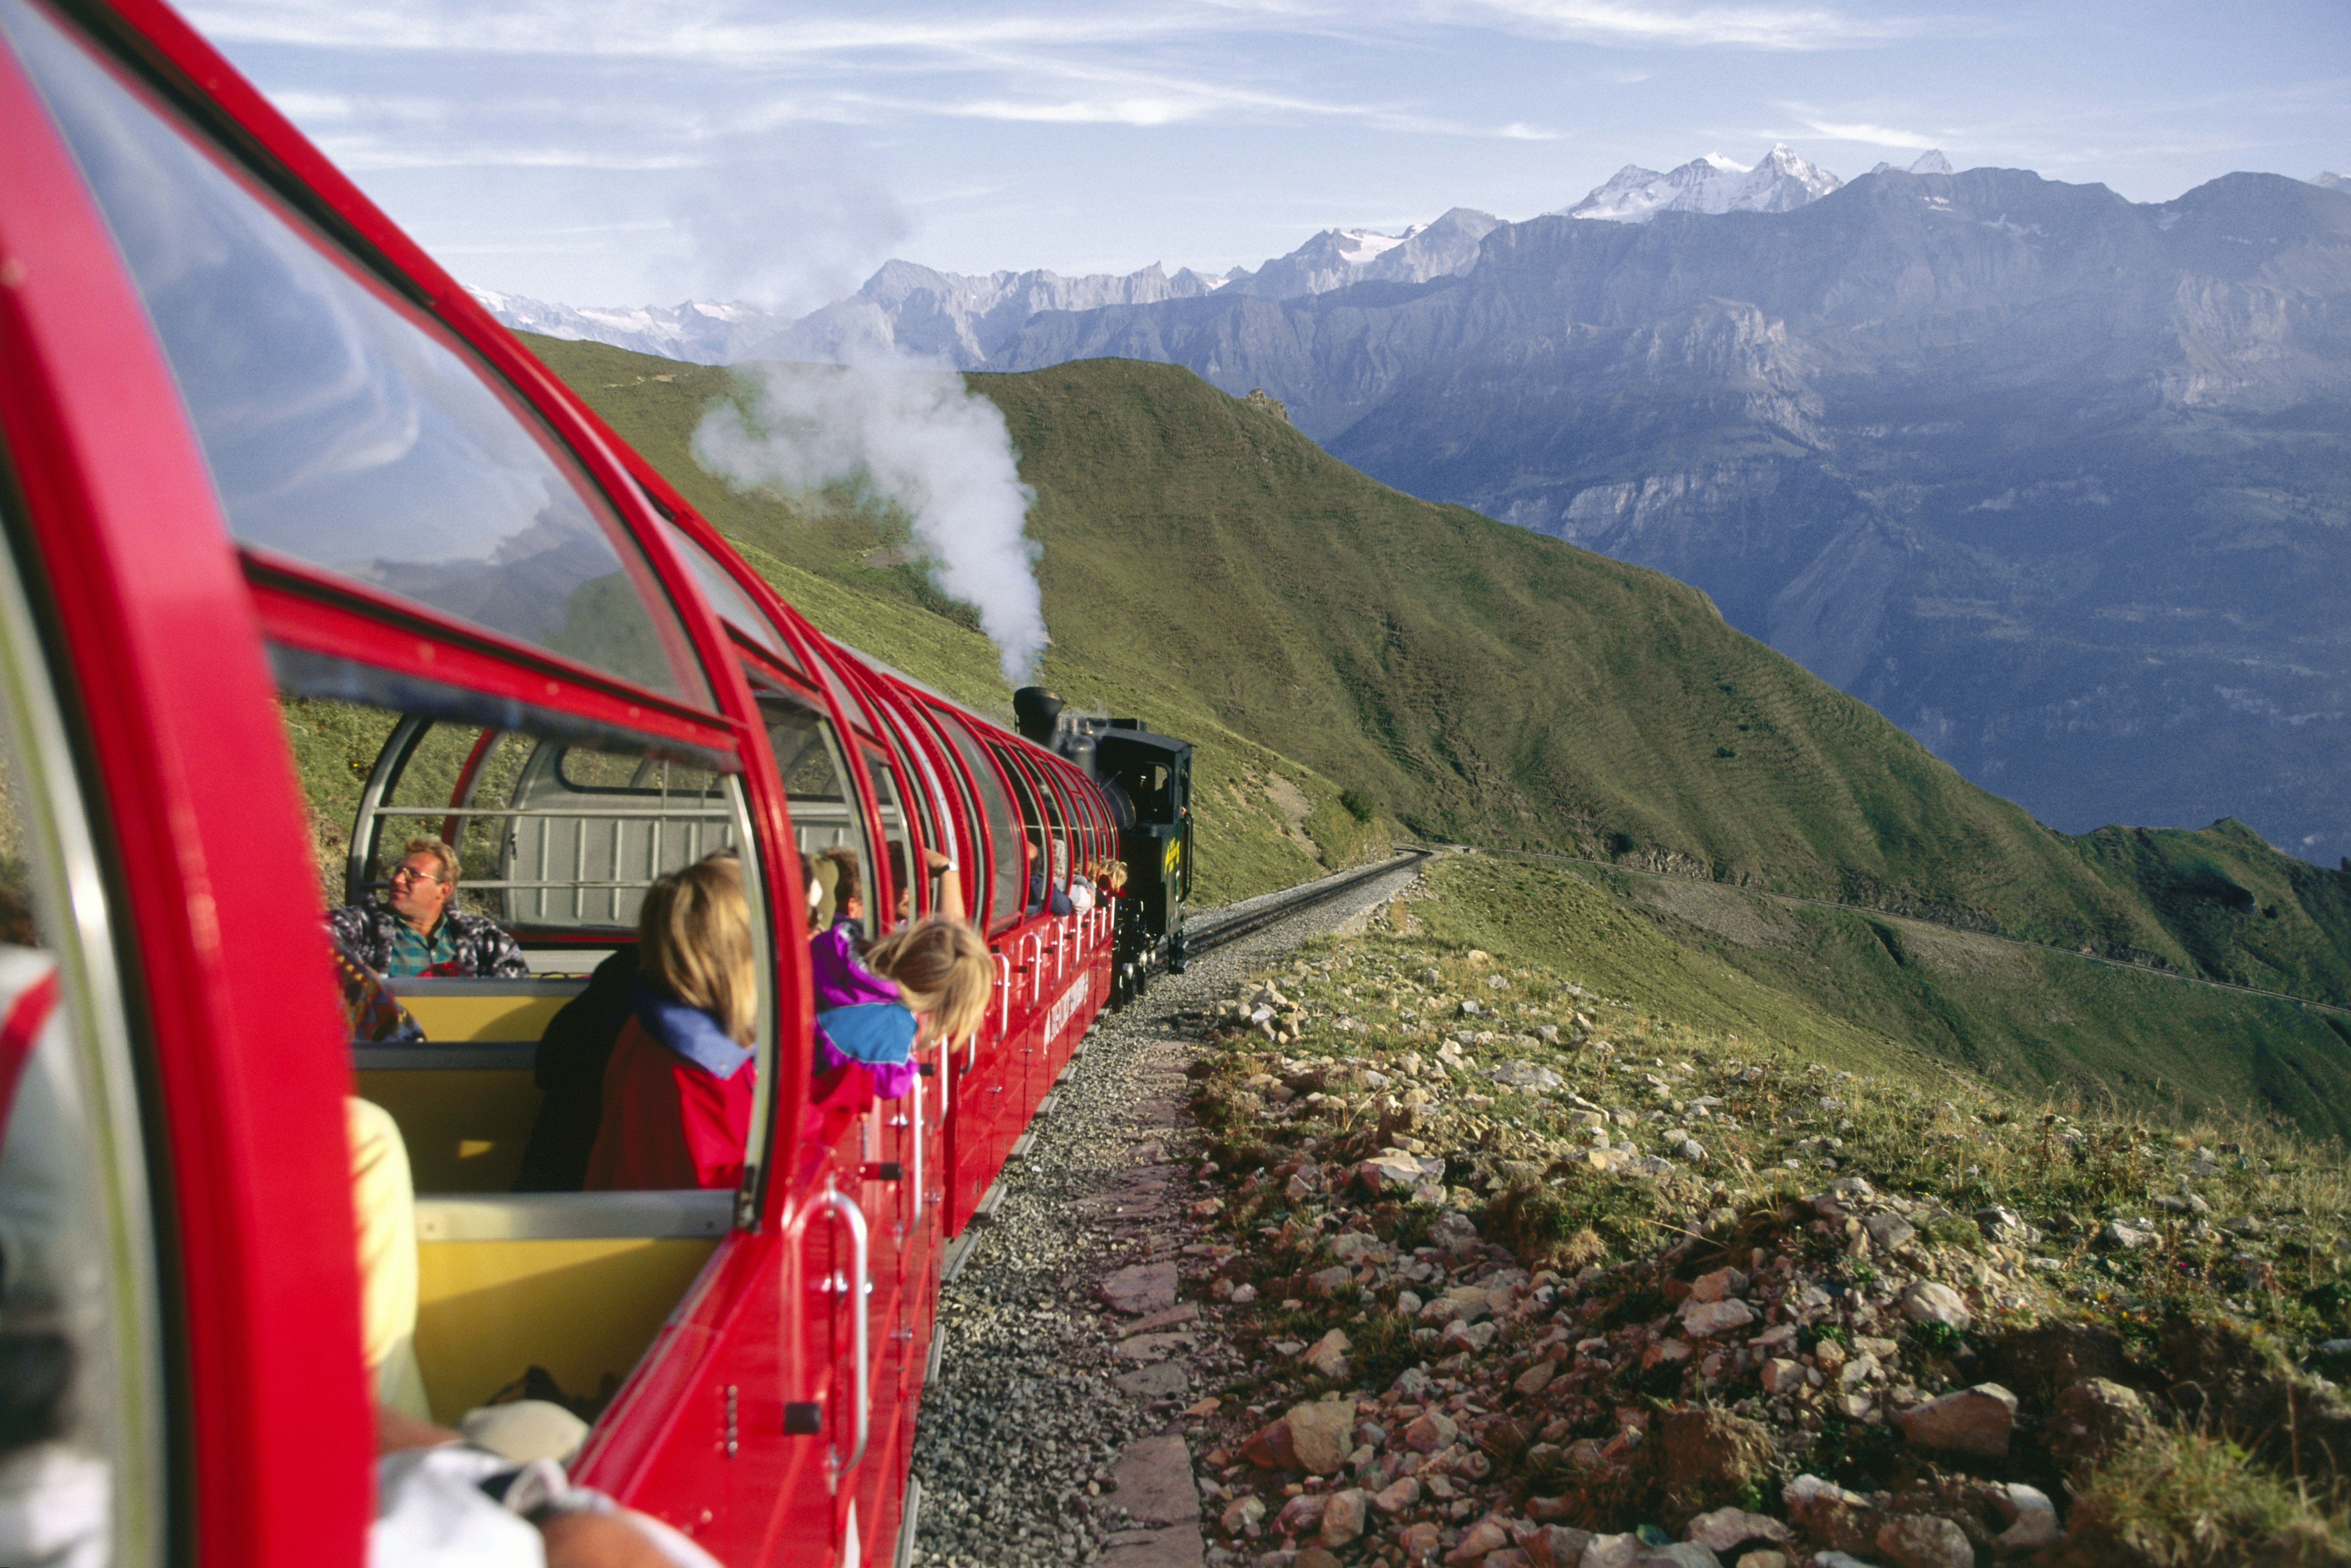 A bright red train with a curved roof made up of as many window panes as possible winds through the Swiss Alps. The photographer is leaning out the window, giving a view back inside of passengers in their seats and one little girl leaning out for a better view of the black steam locomotive pulling the train..